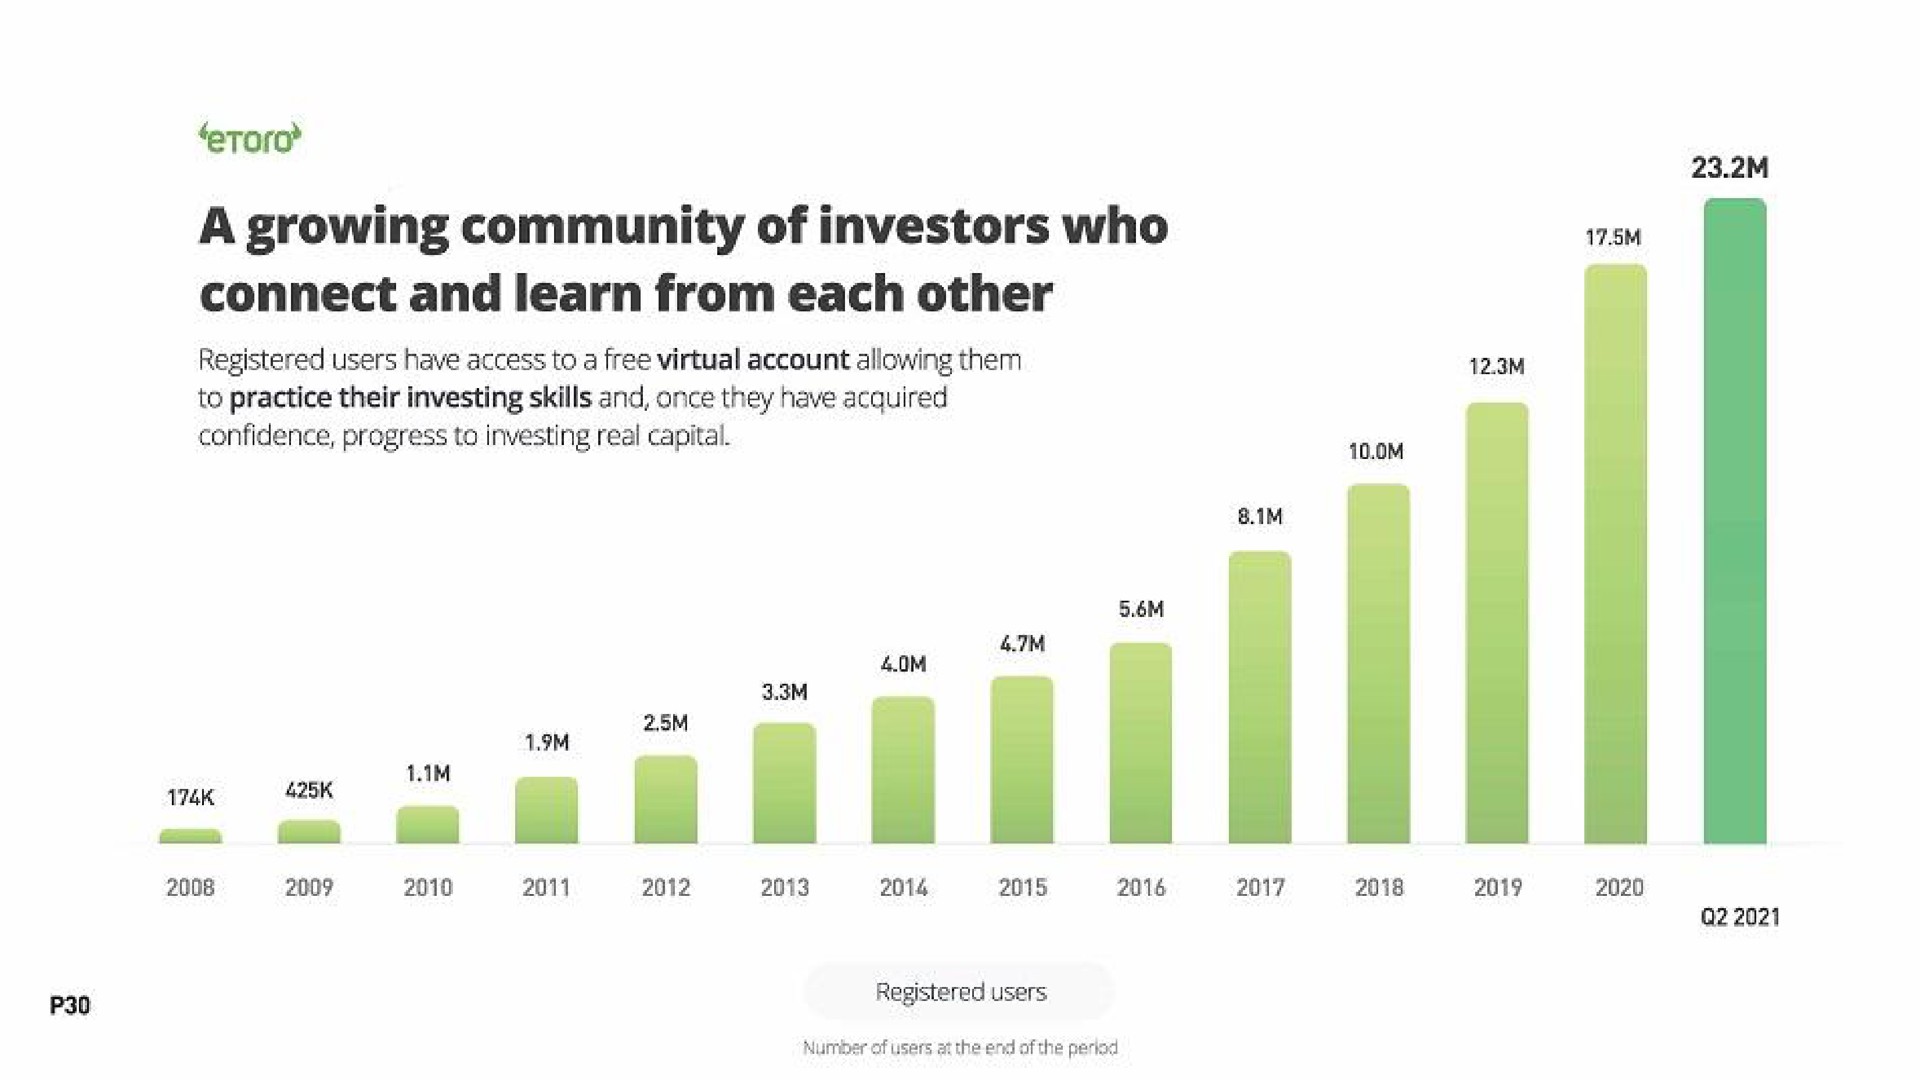 a growing community of investors who connect and learn from each other to practice their investing skills and once they have acquired confidence progress to investing real capital | eToro